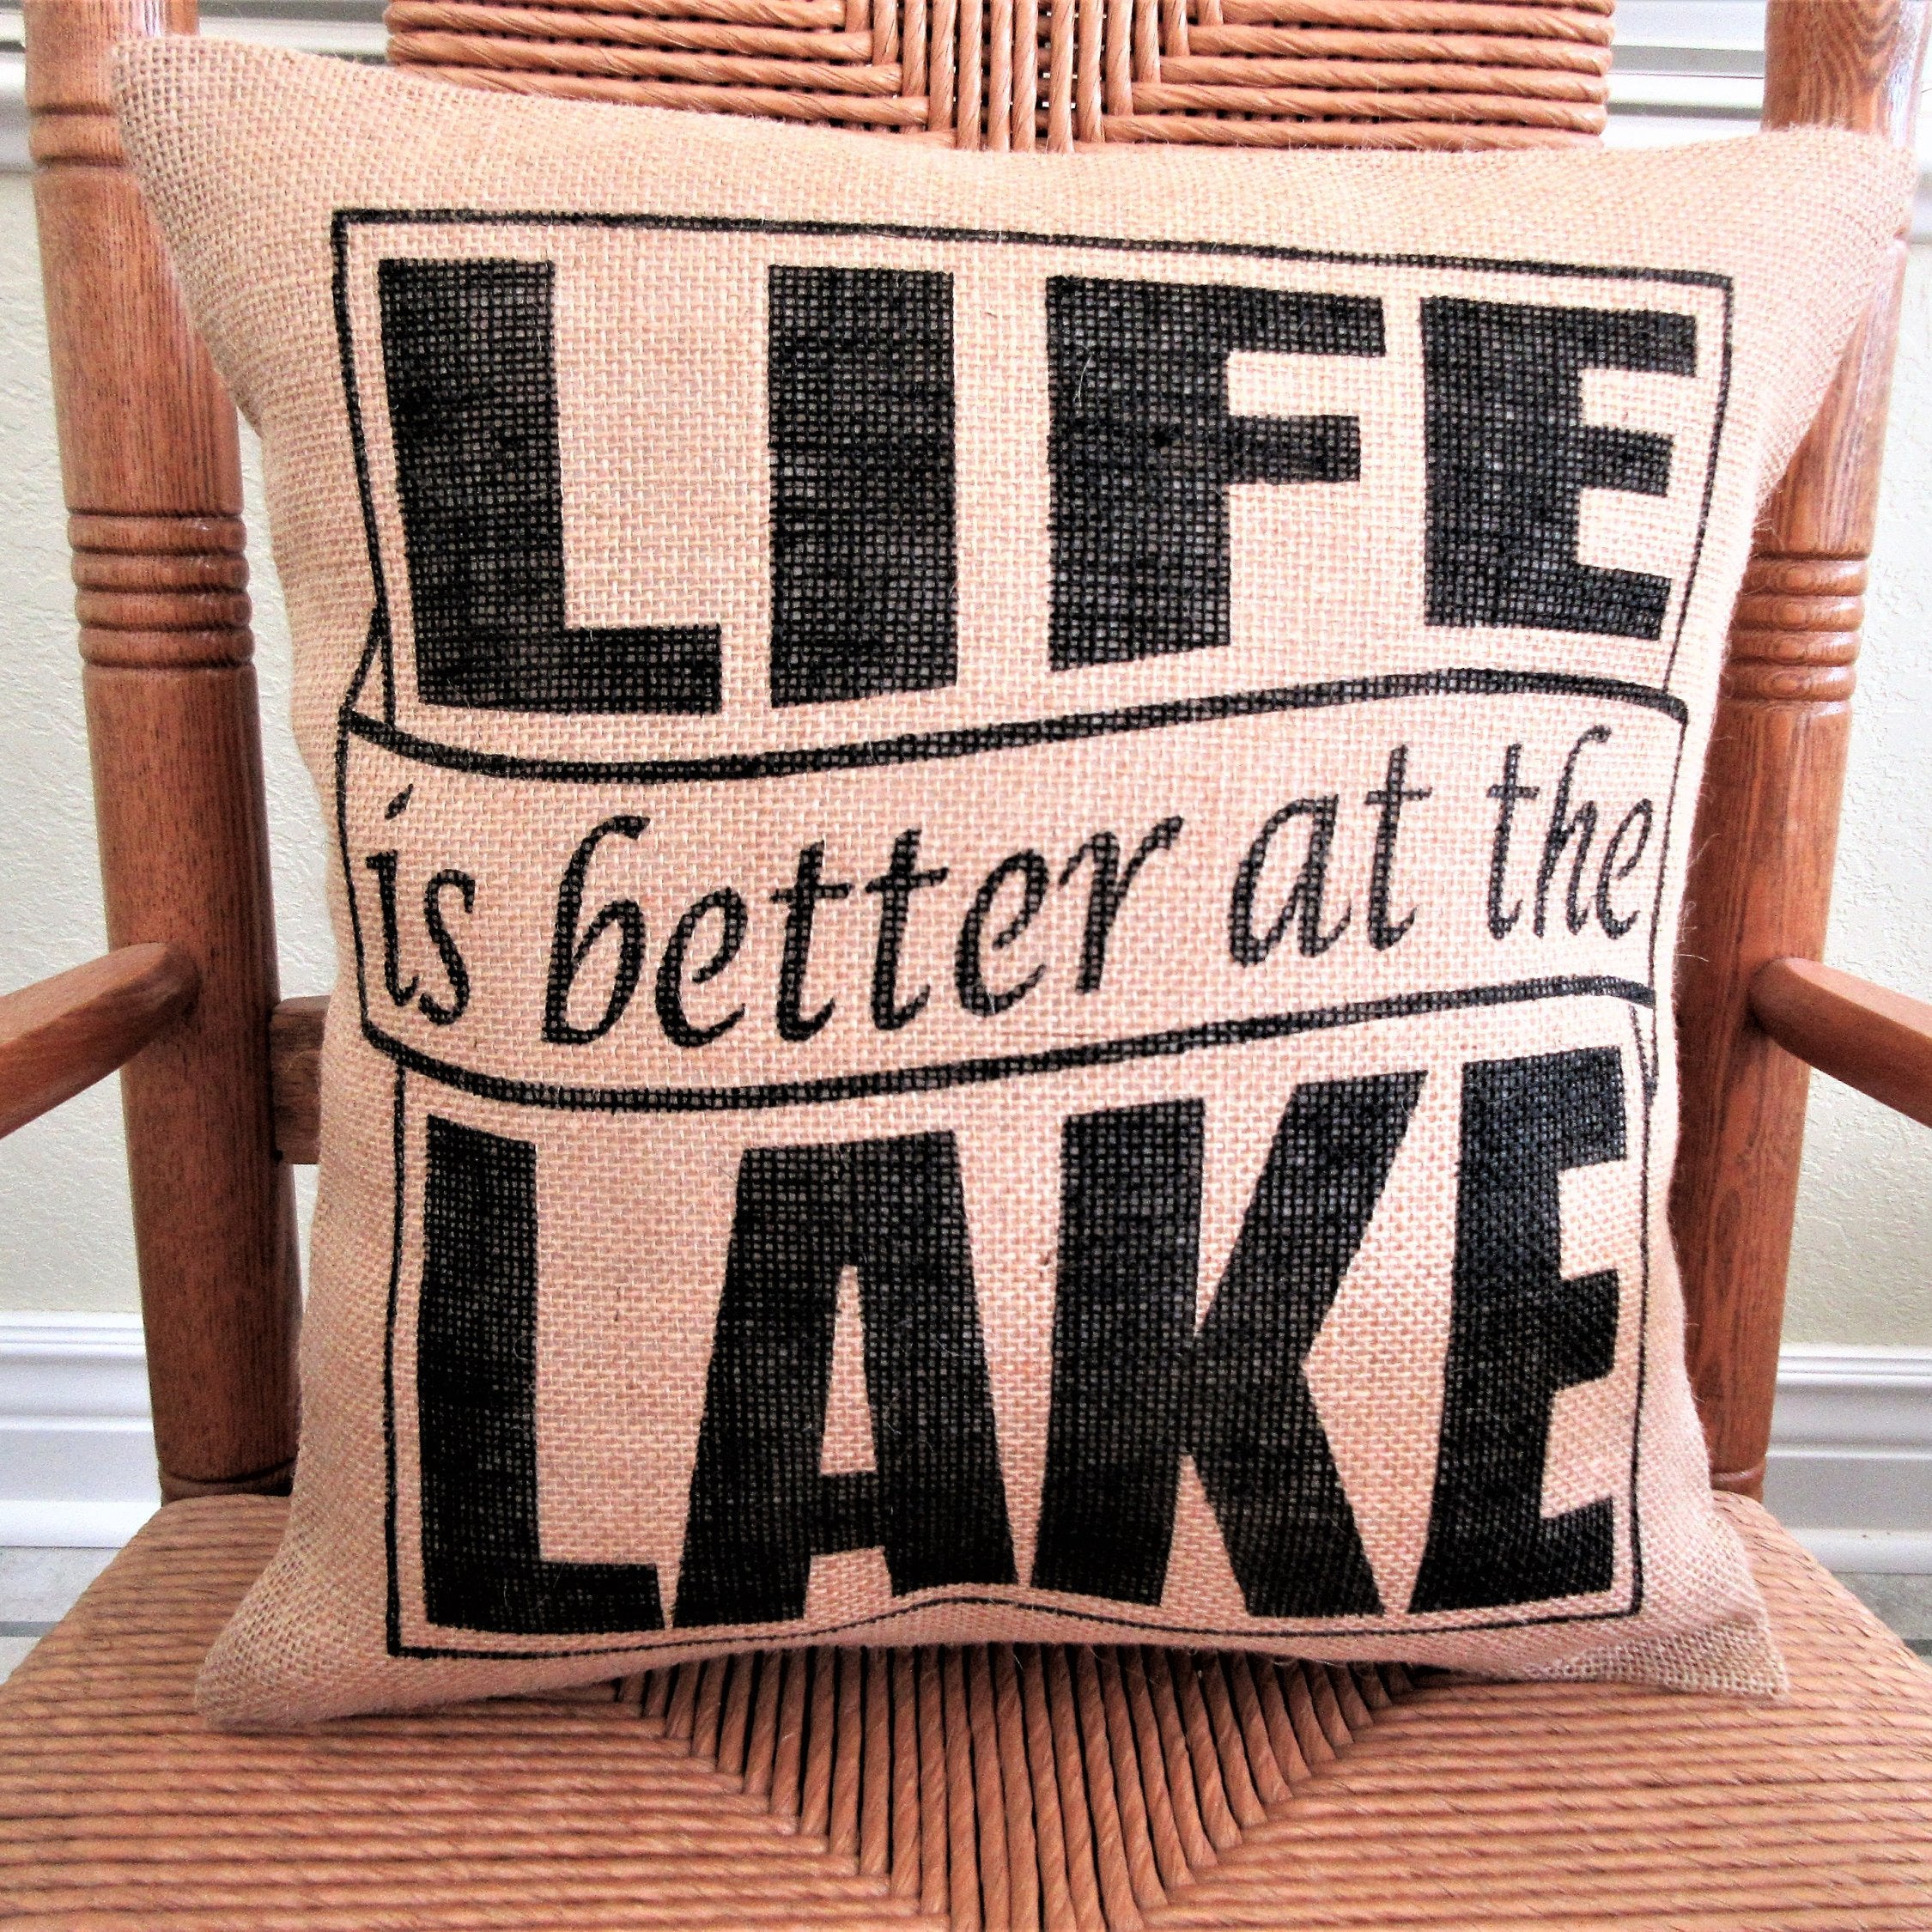 Life is better at the lake Burlap Pillow